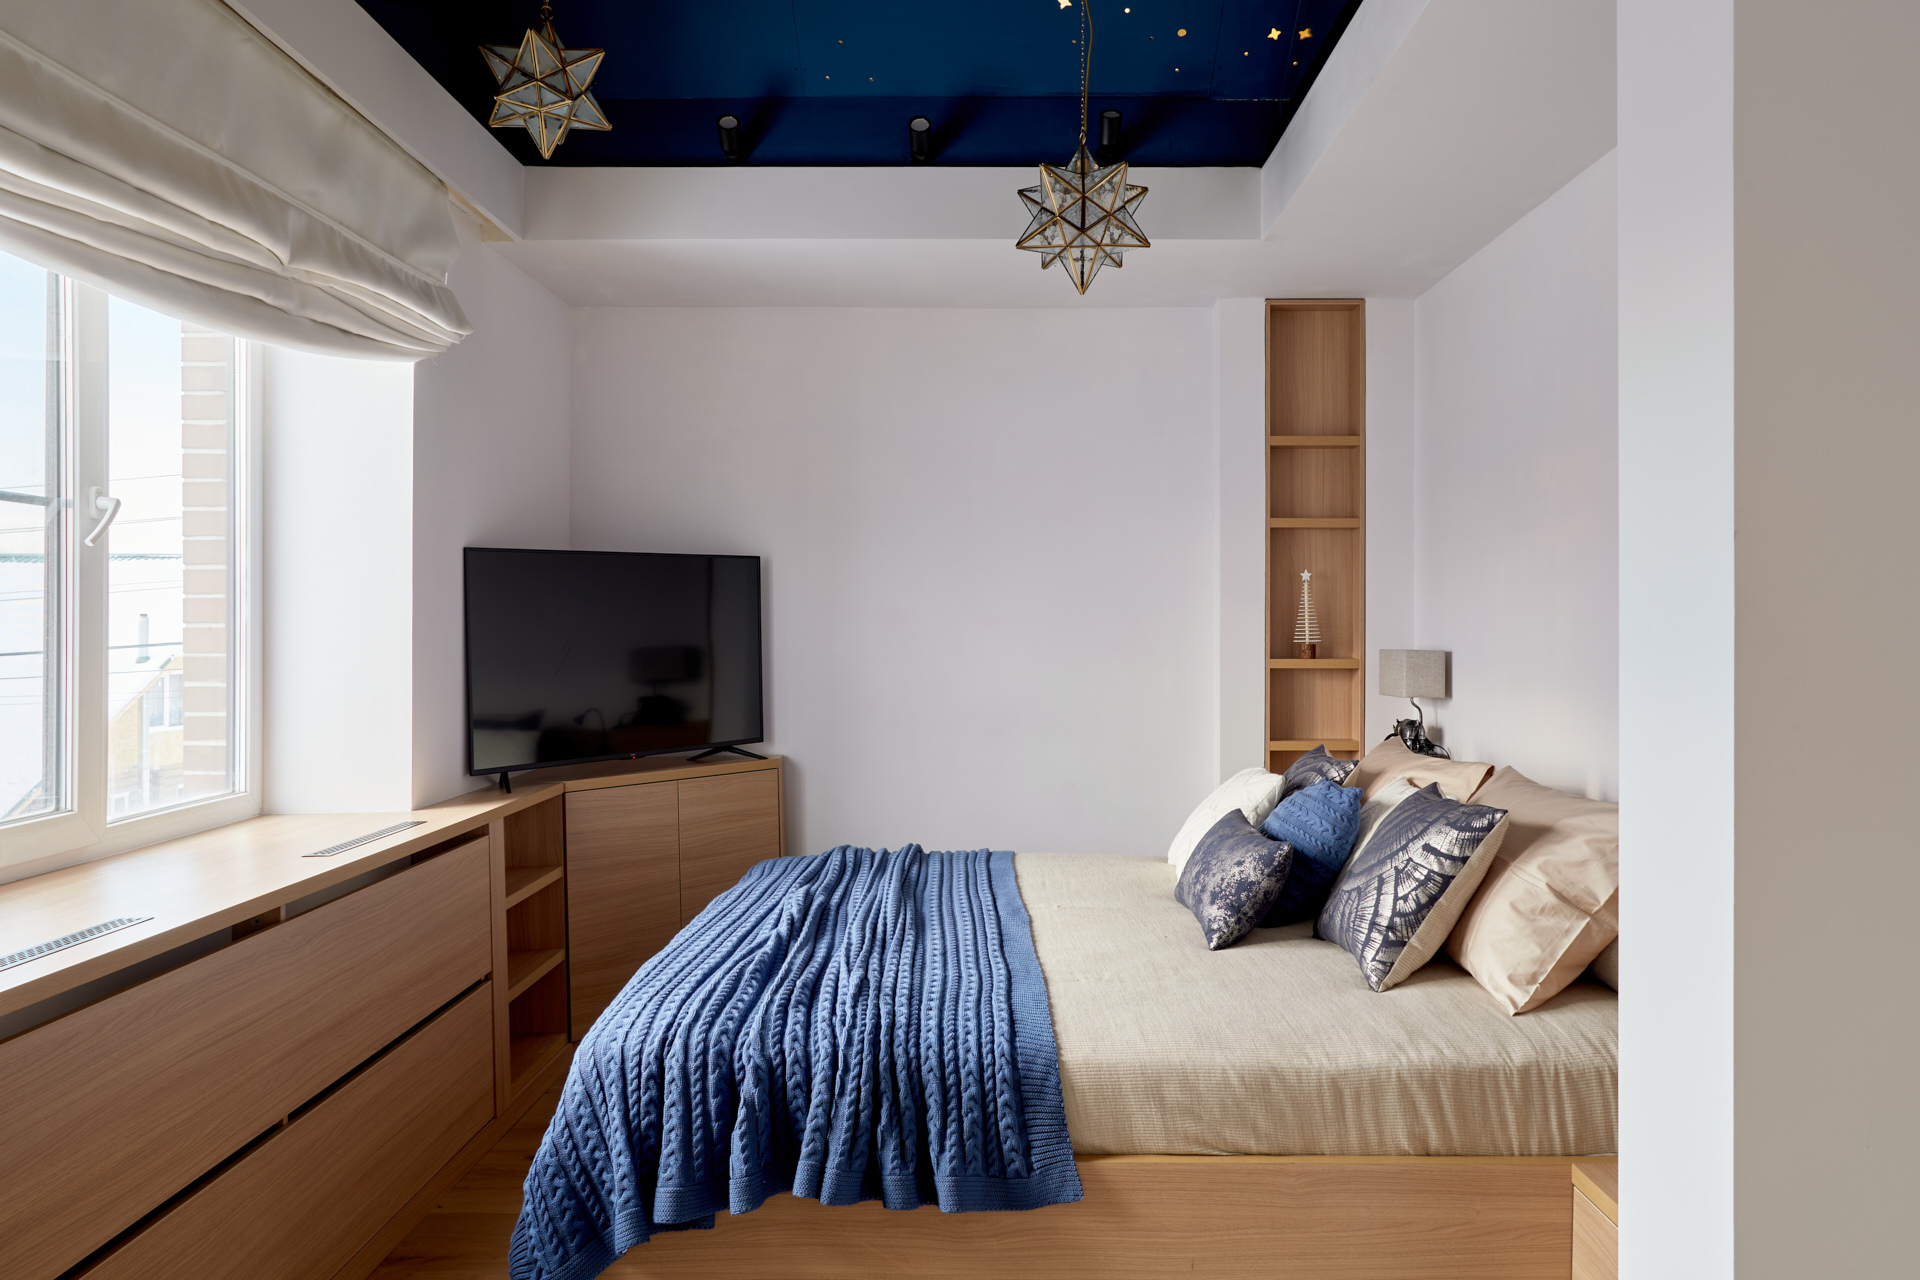 Chipboard Lamarty in "White"and "Noce Neapol" and SyPly plywood in the "Dachny Otvet" project on NTV. Observatory bedroom under starlight